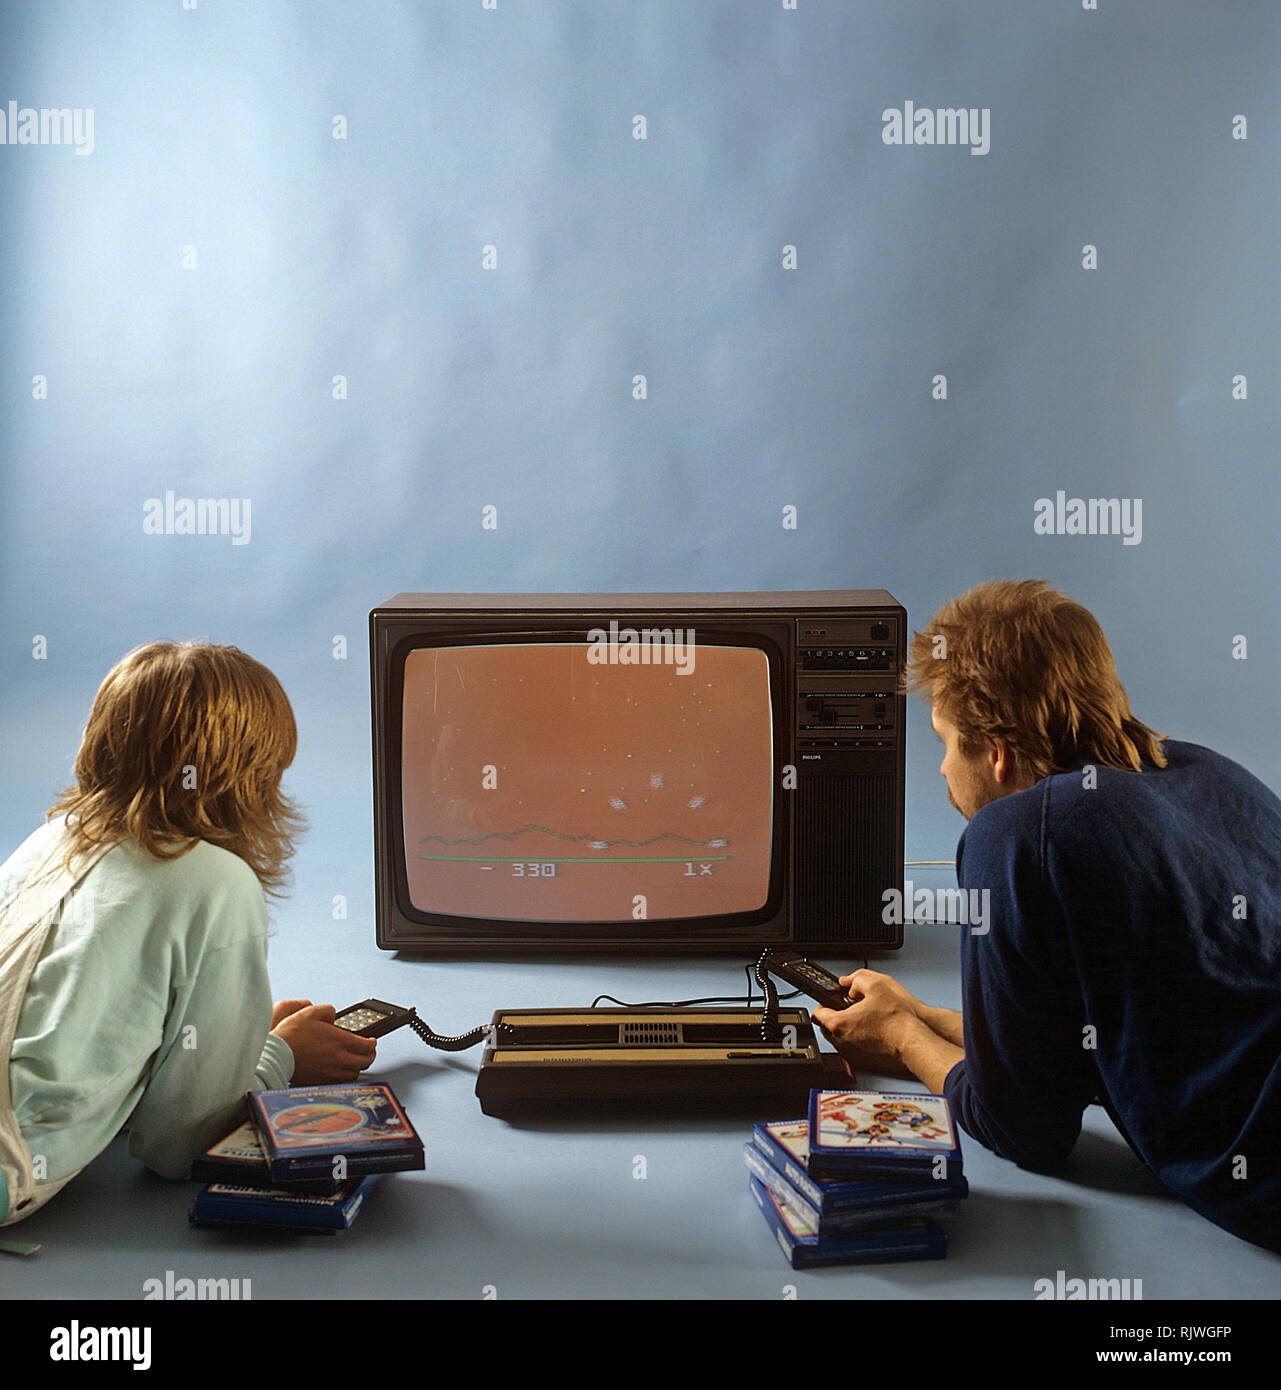 Home video games in the 1980s. A home video game console from Intellivison released by Mattel electronics in 1979. Pictured two people playing a game on a television set. ref BV97-5 Stock Photo